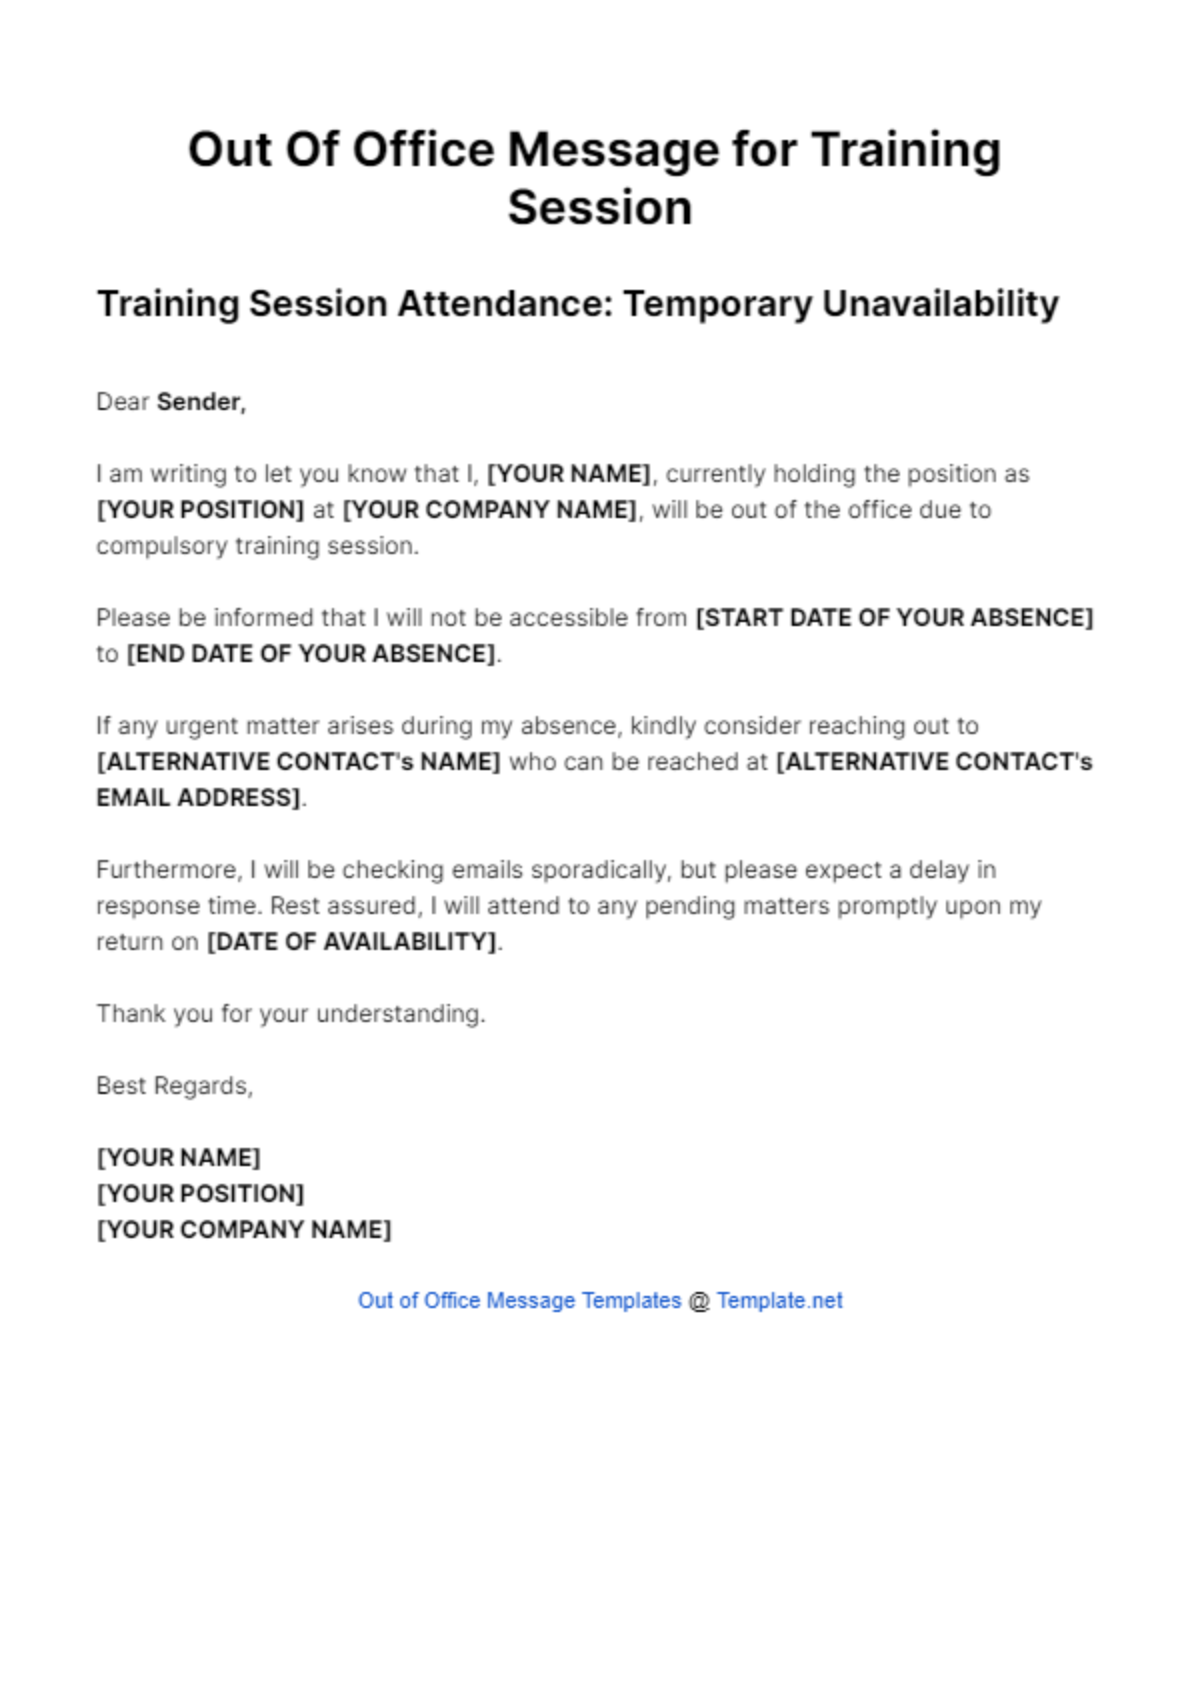 Out Of Office Message for Training Session Template